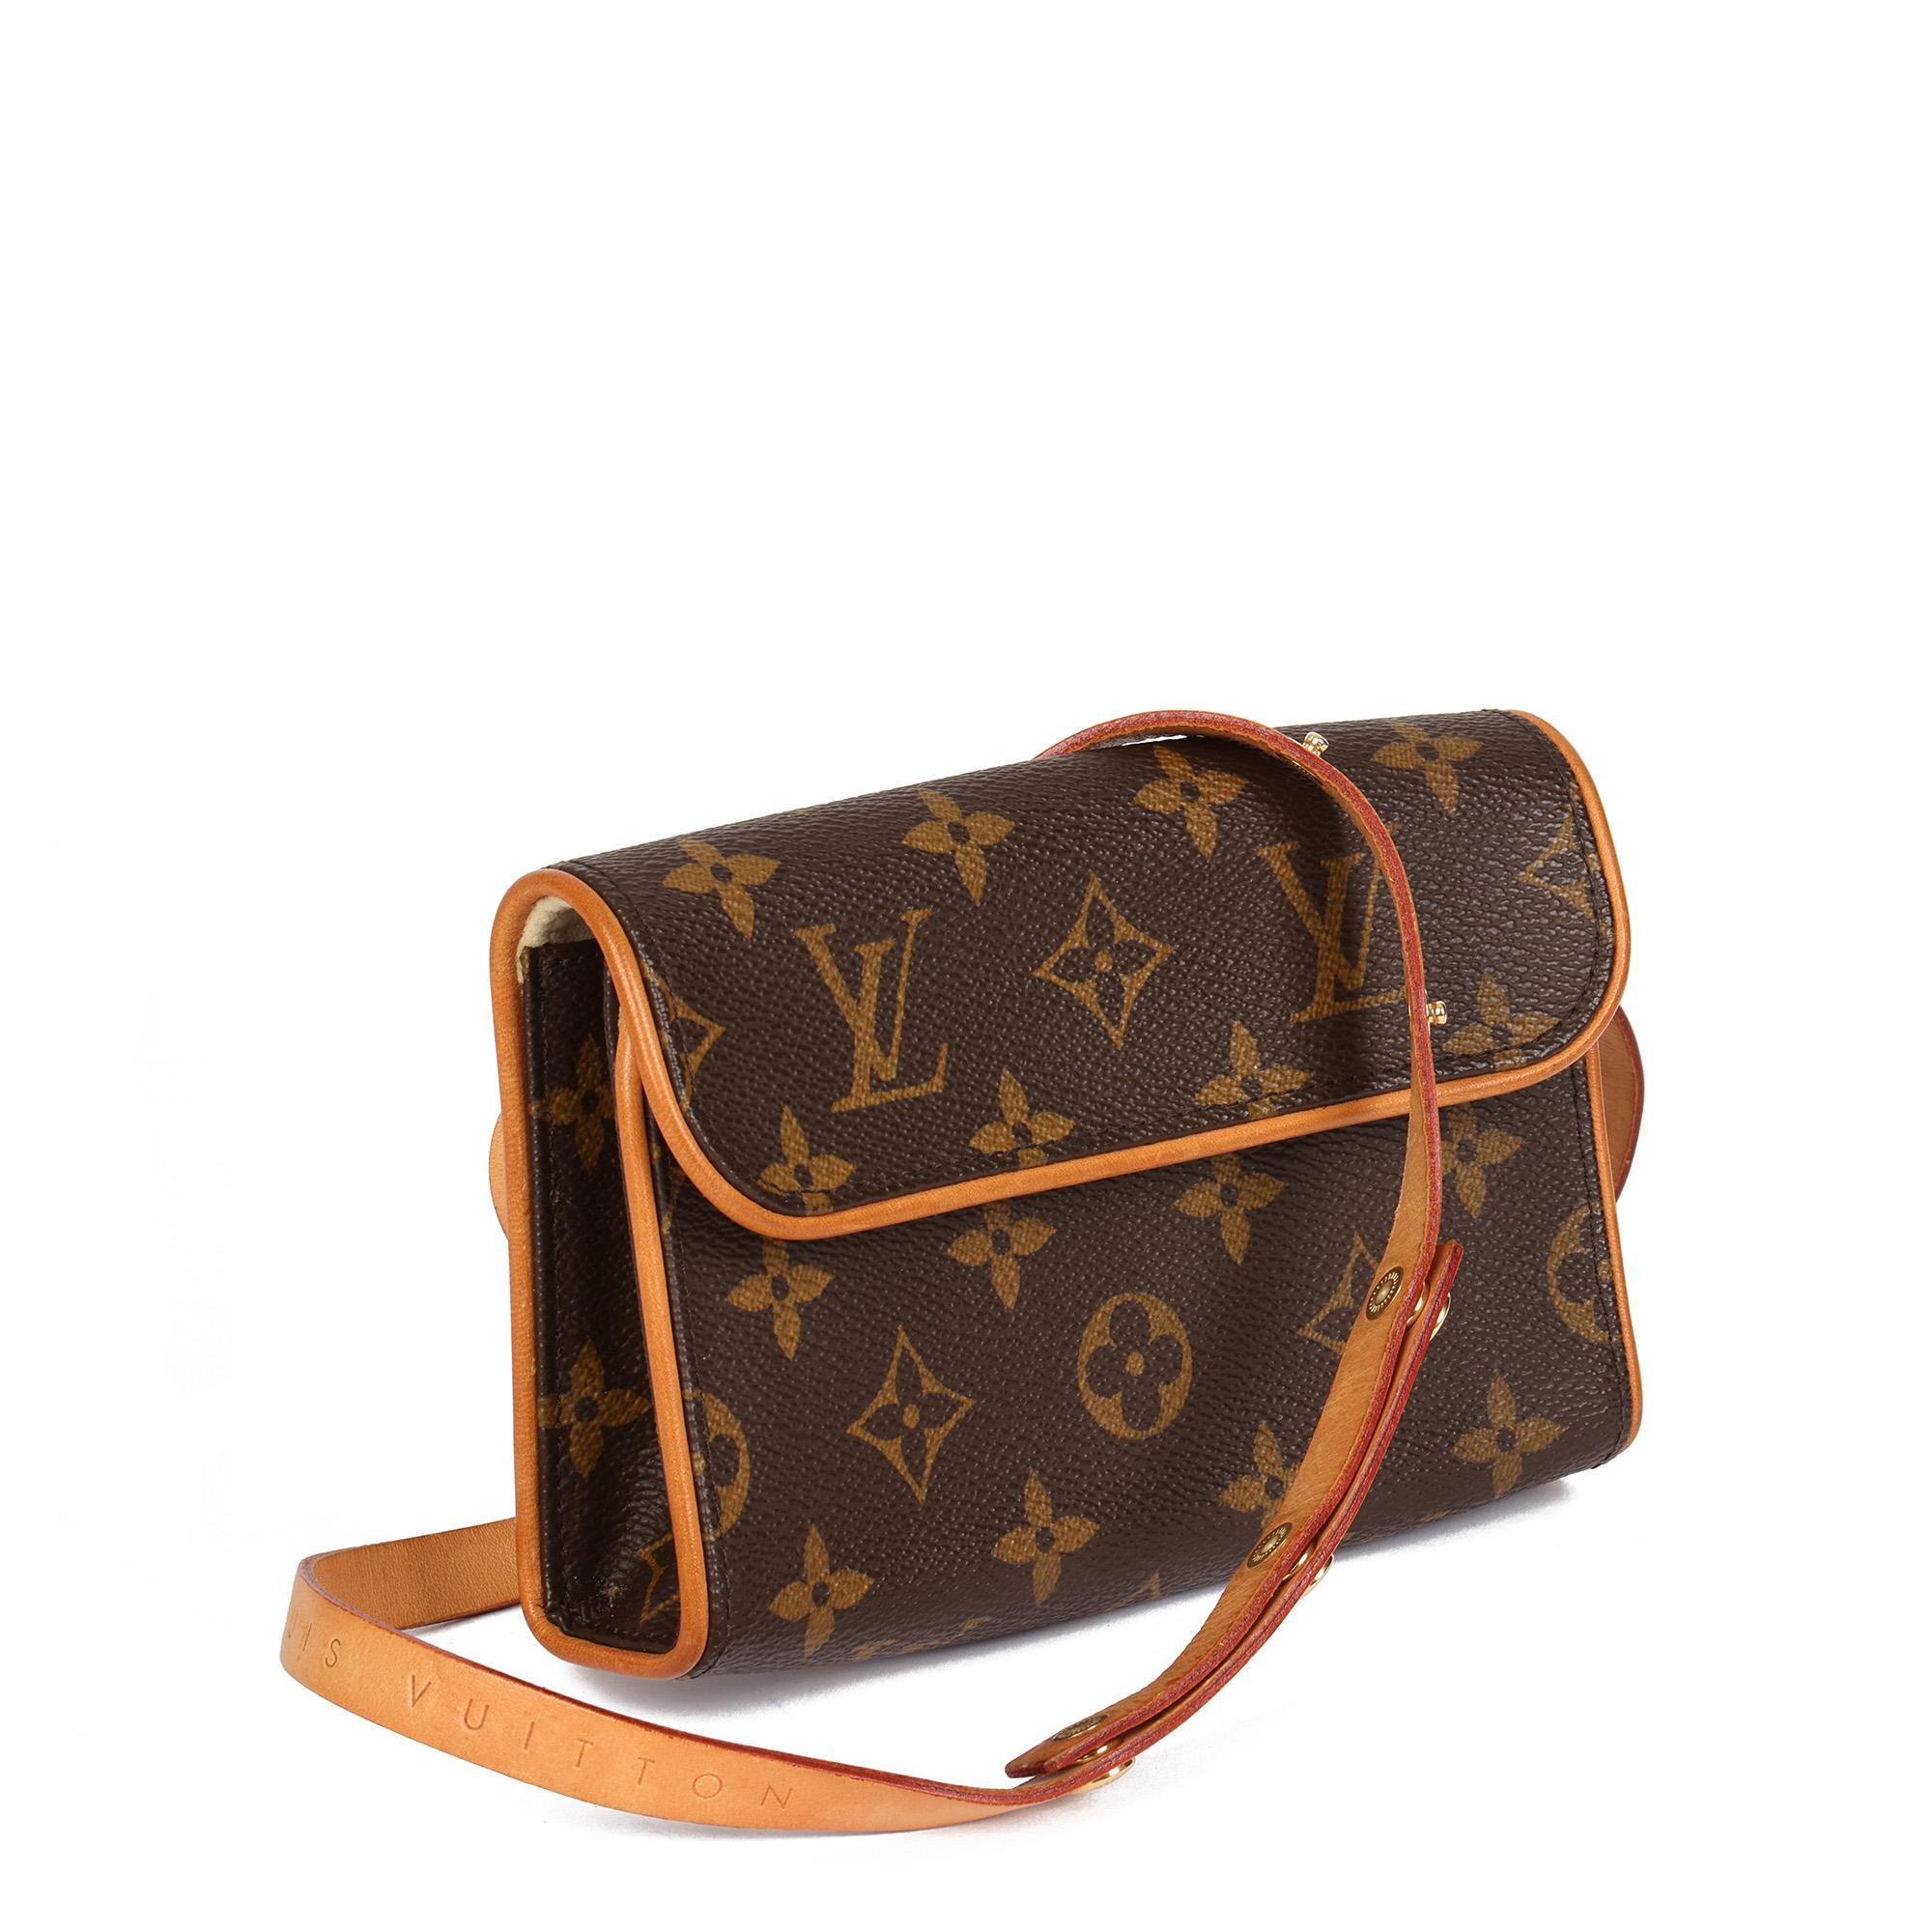 LOUIS VUITTON
Brown Monogram Coated Canvas & Vachetta Leather Florentine Belt Bag

Xupes Reference: CB703
Serial Number: FL4008
Age (Circa): 2008
Authenticity Details: Date Stamp (Made in France)
Gender: Ladies
Type: Belt Bag

Colour: